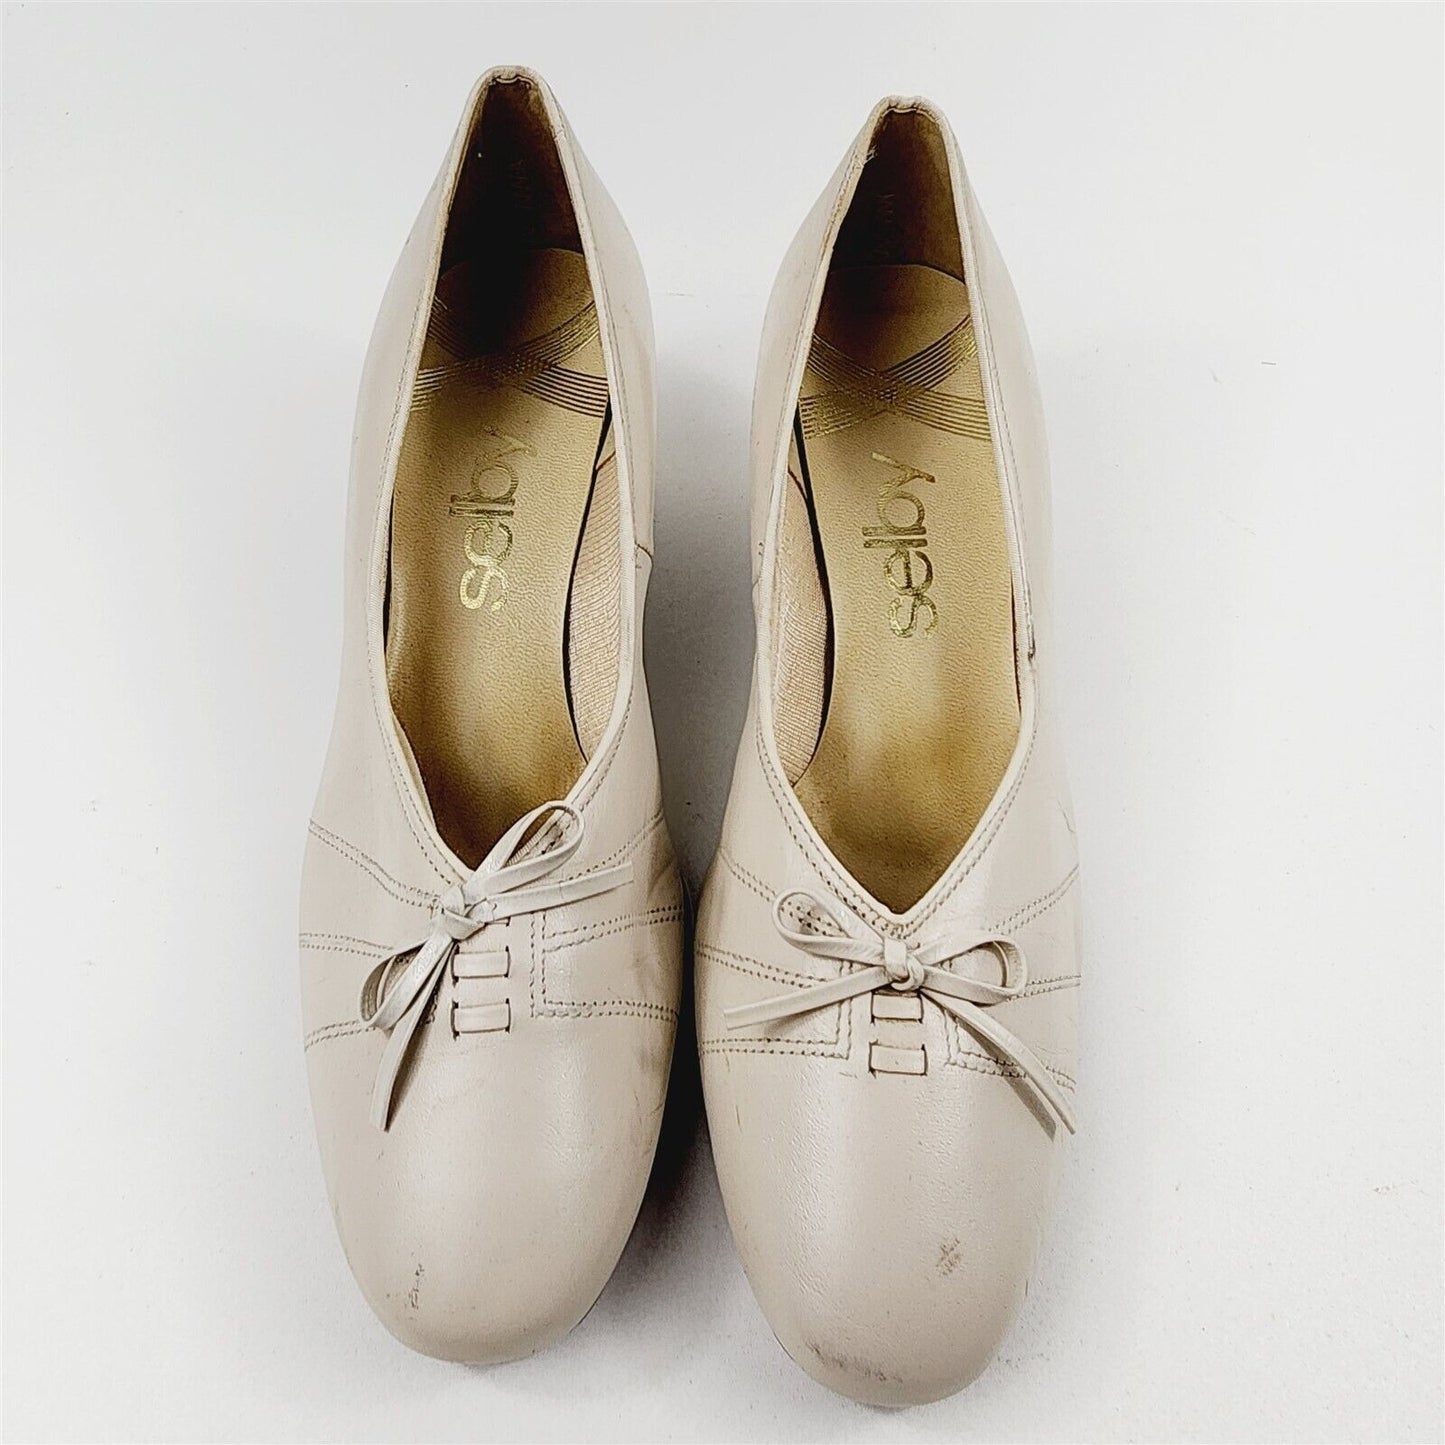 Vintage Selby Beige Gray Leather Pumps Heels Shoes Womens Size 7.5